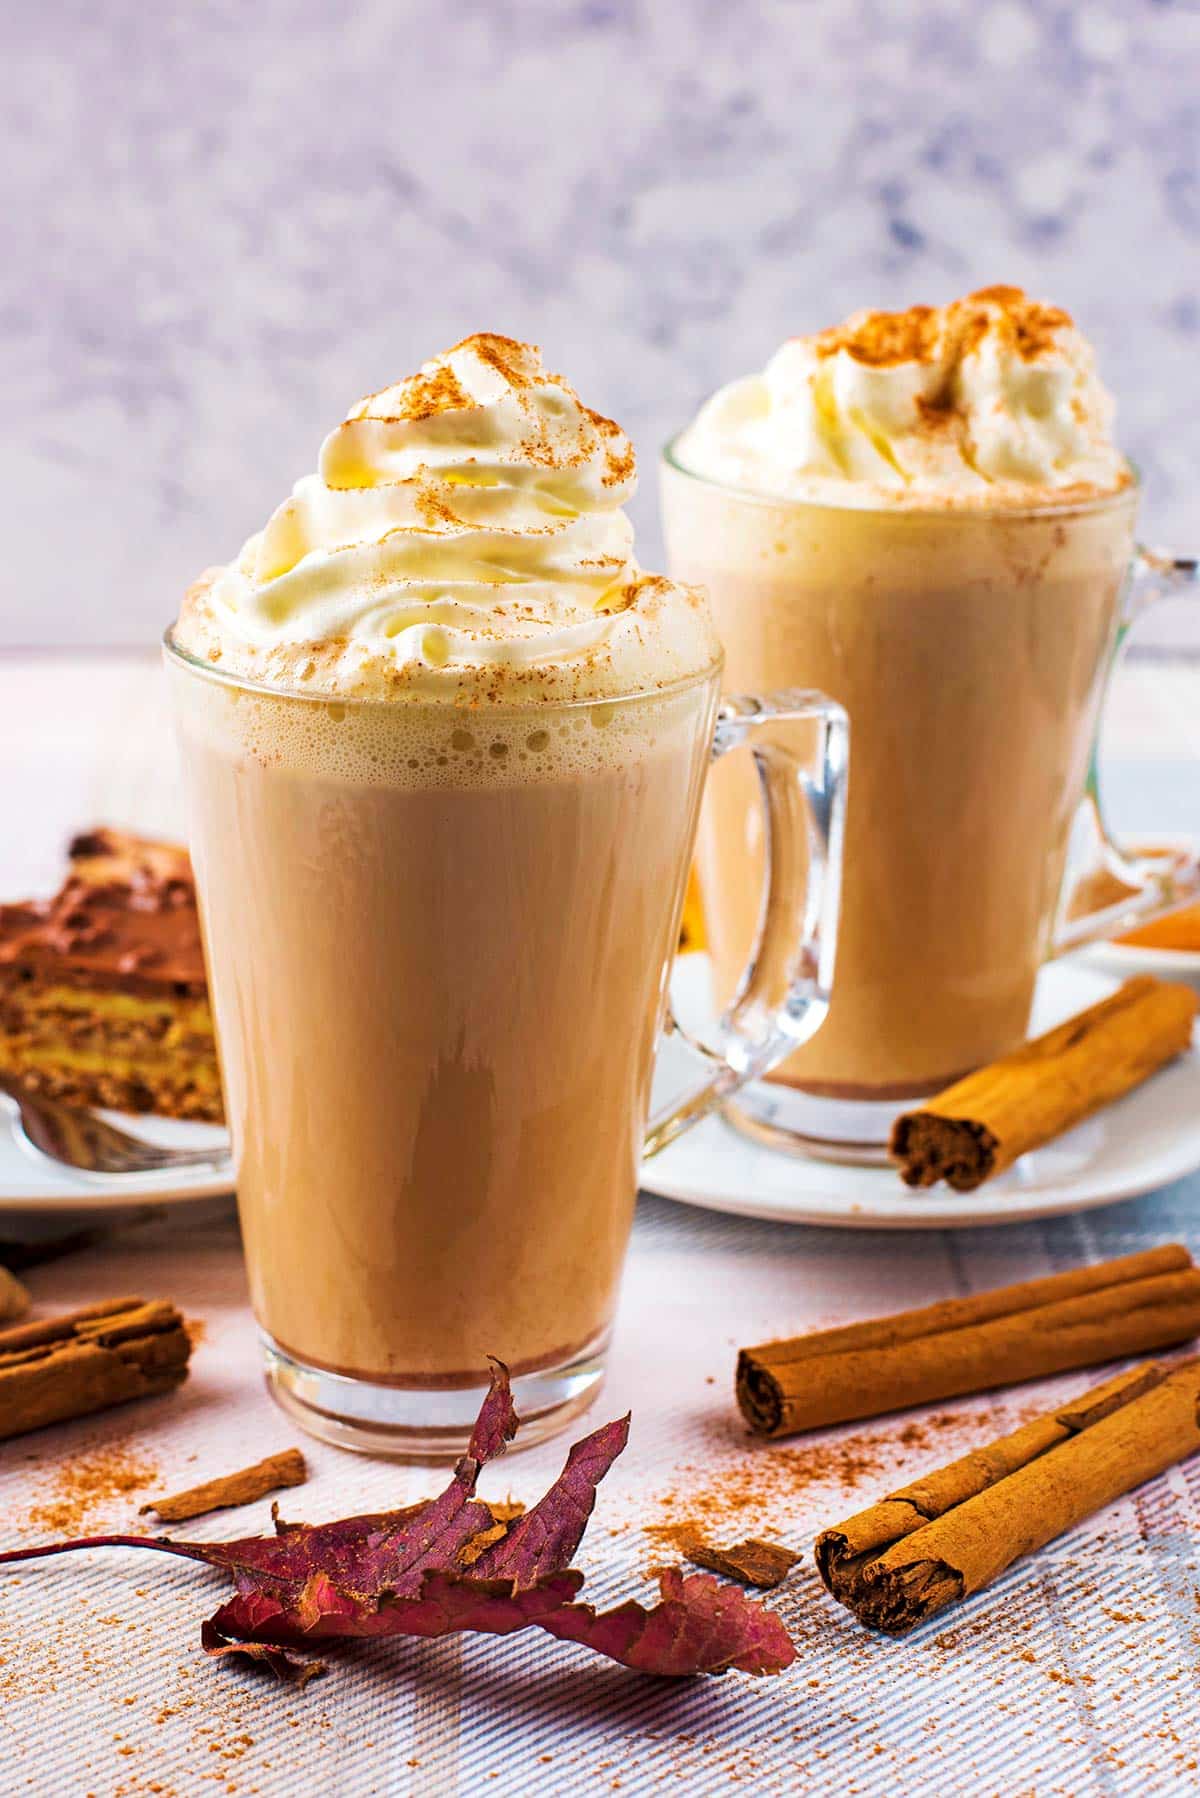 Two glasses of milky coffee topped with whipped cream. Cinnamon sticks lay next to them.